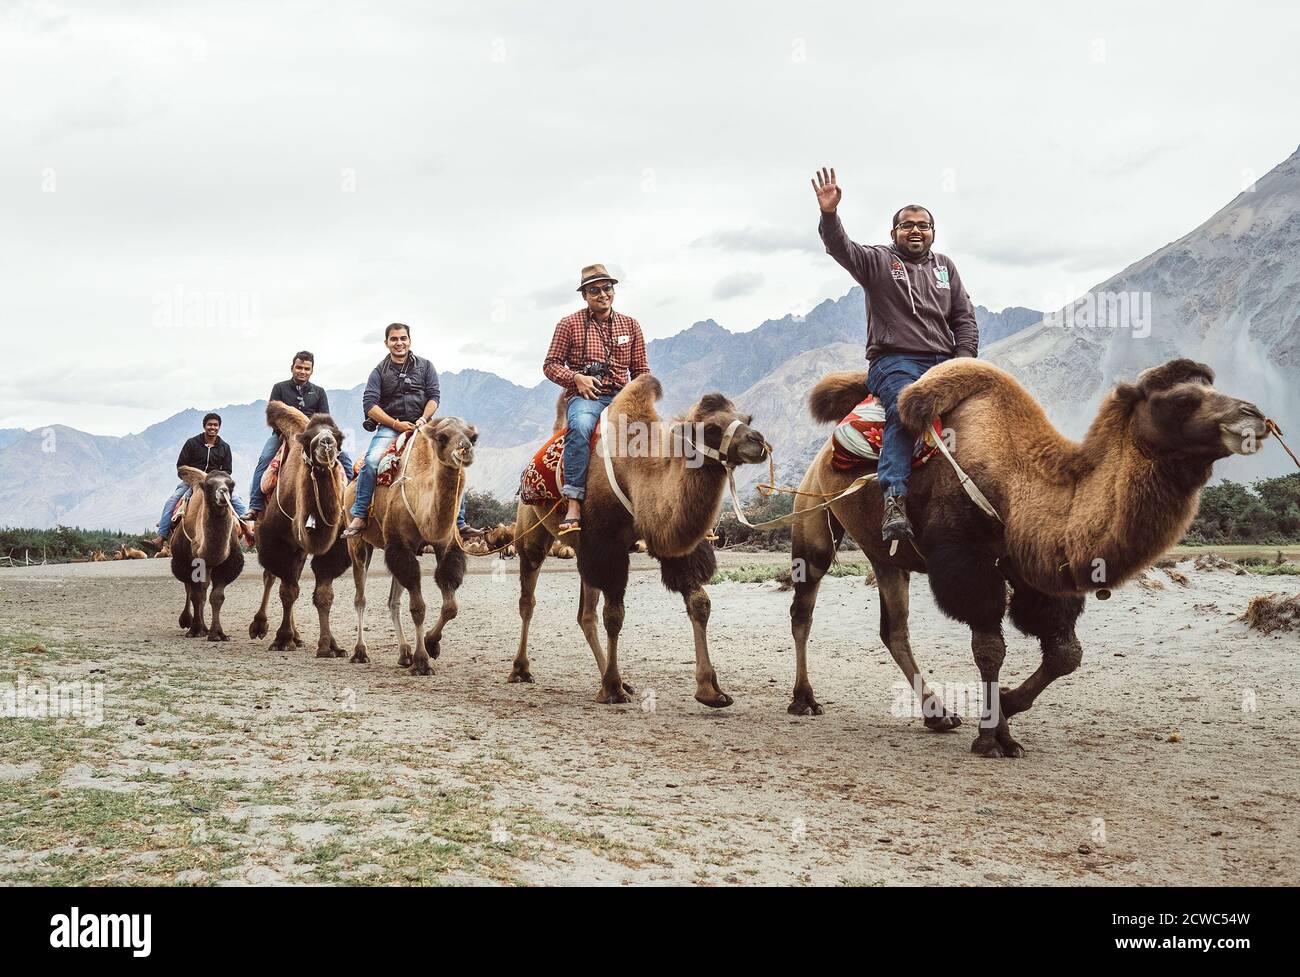 Hundar village in Leh district , Jammu and Kashmir, India - August 21, 2016: Tourists ride the unique camels of the highest mountain desert. Very popu Stock Photo